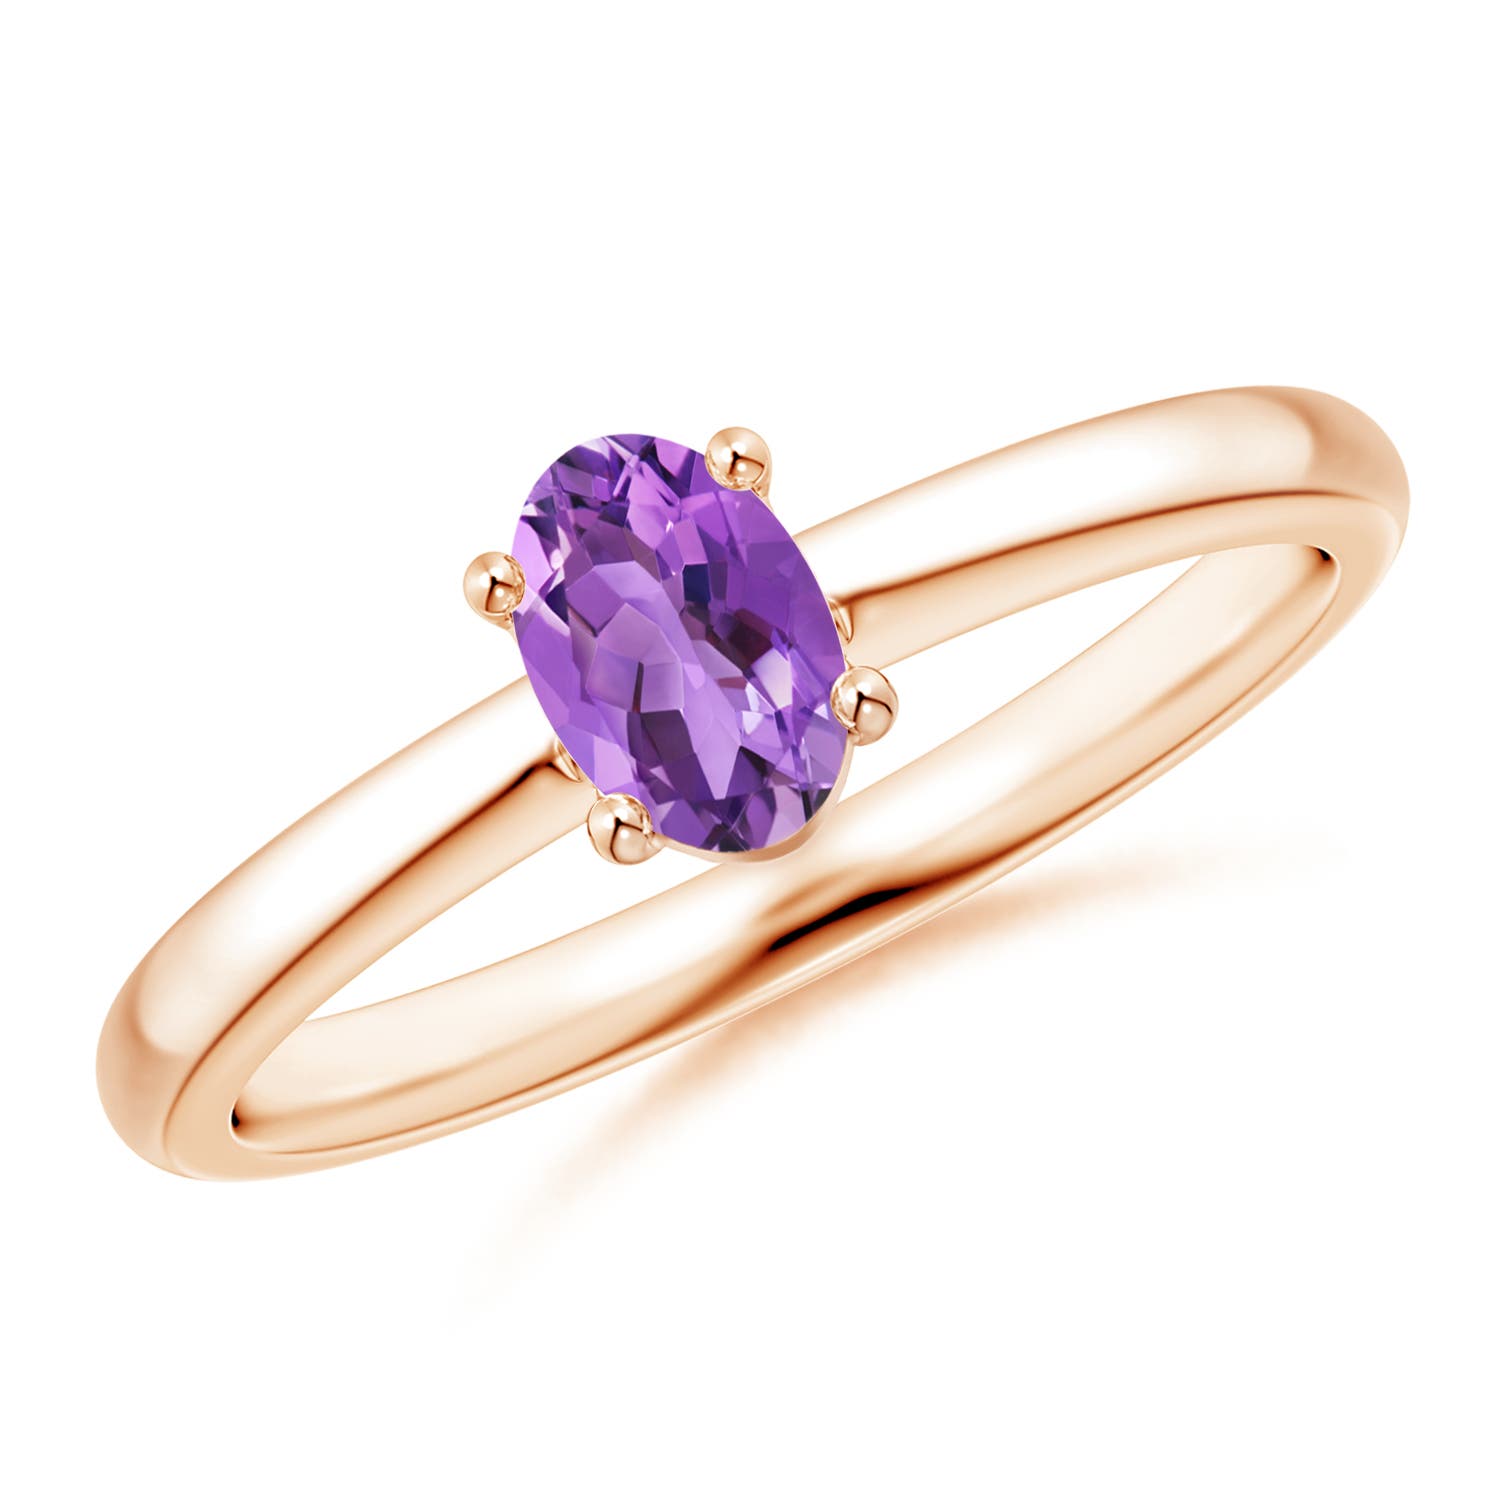 AA - Amethyst / 0.4 CT / 14 KT Rose Gold